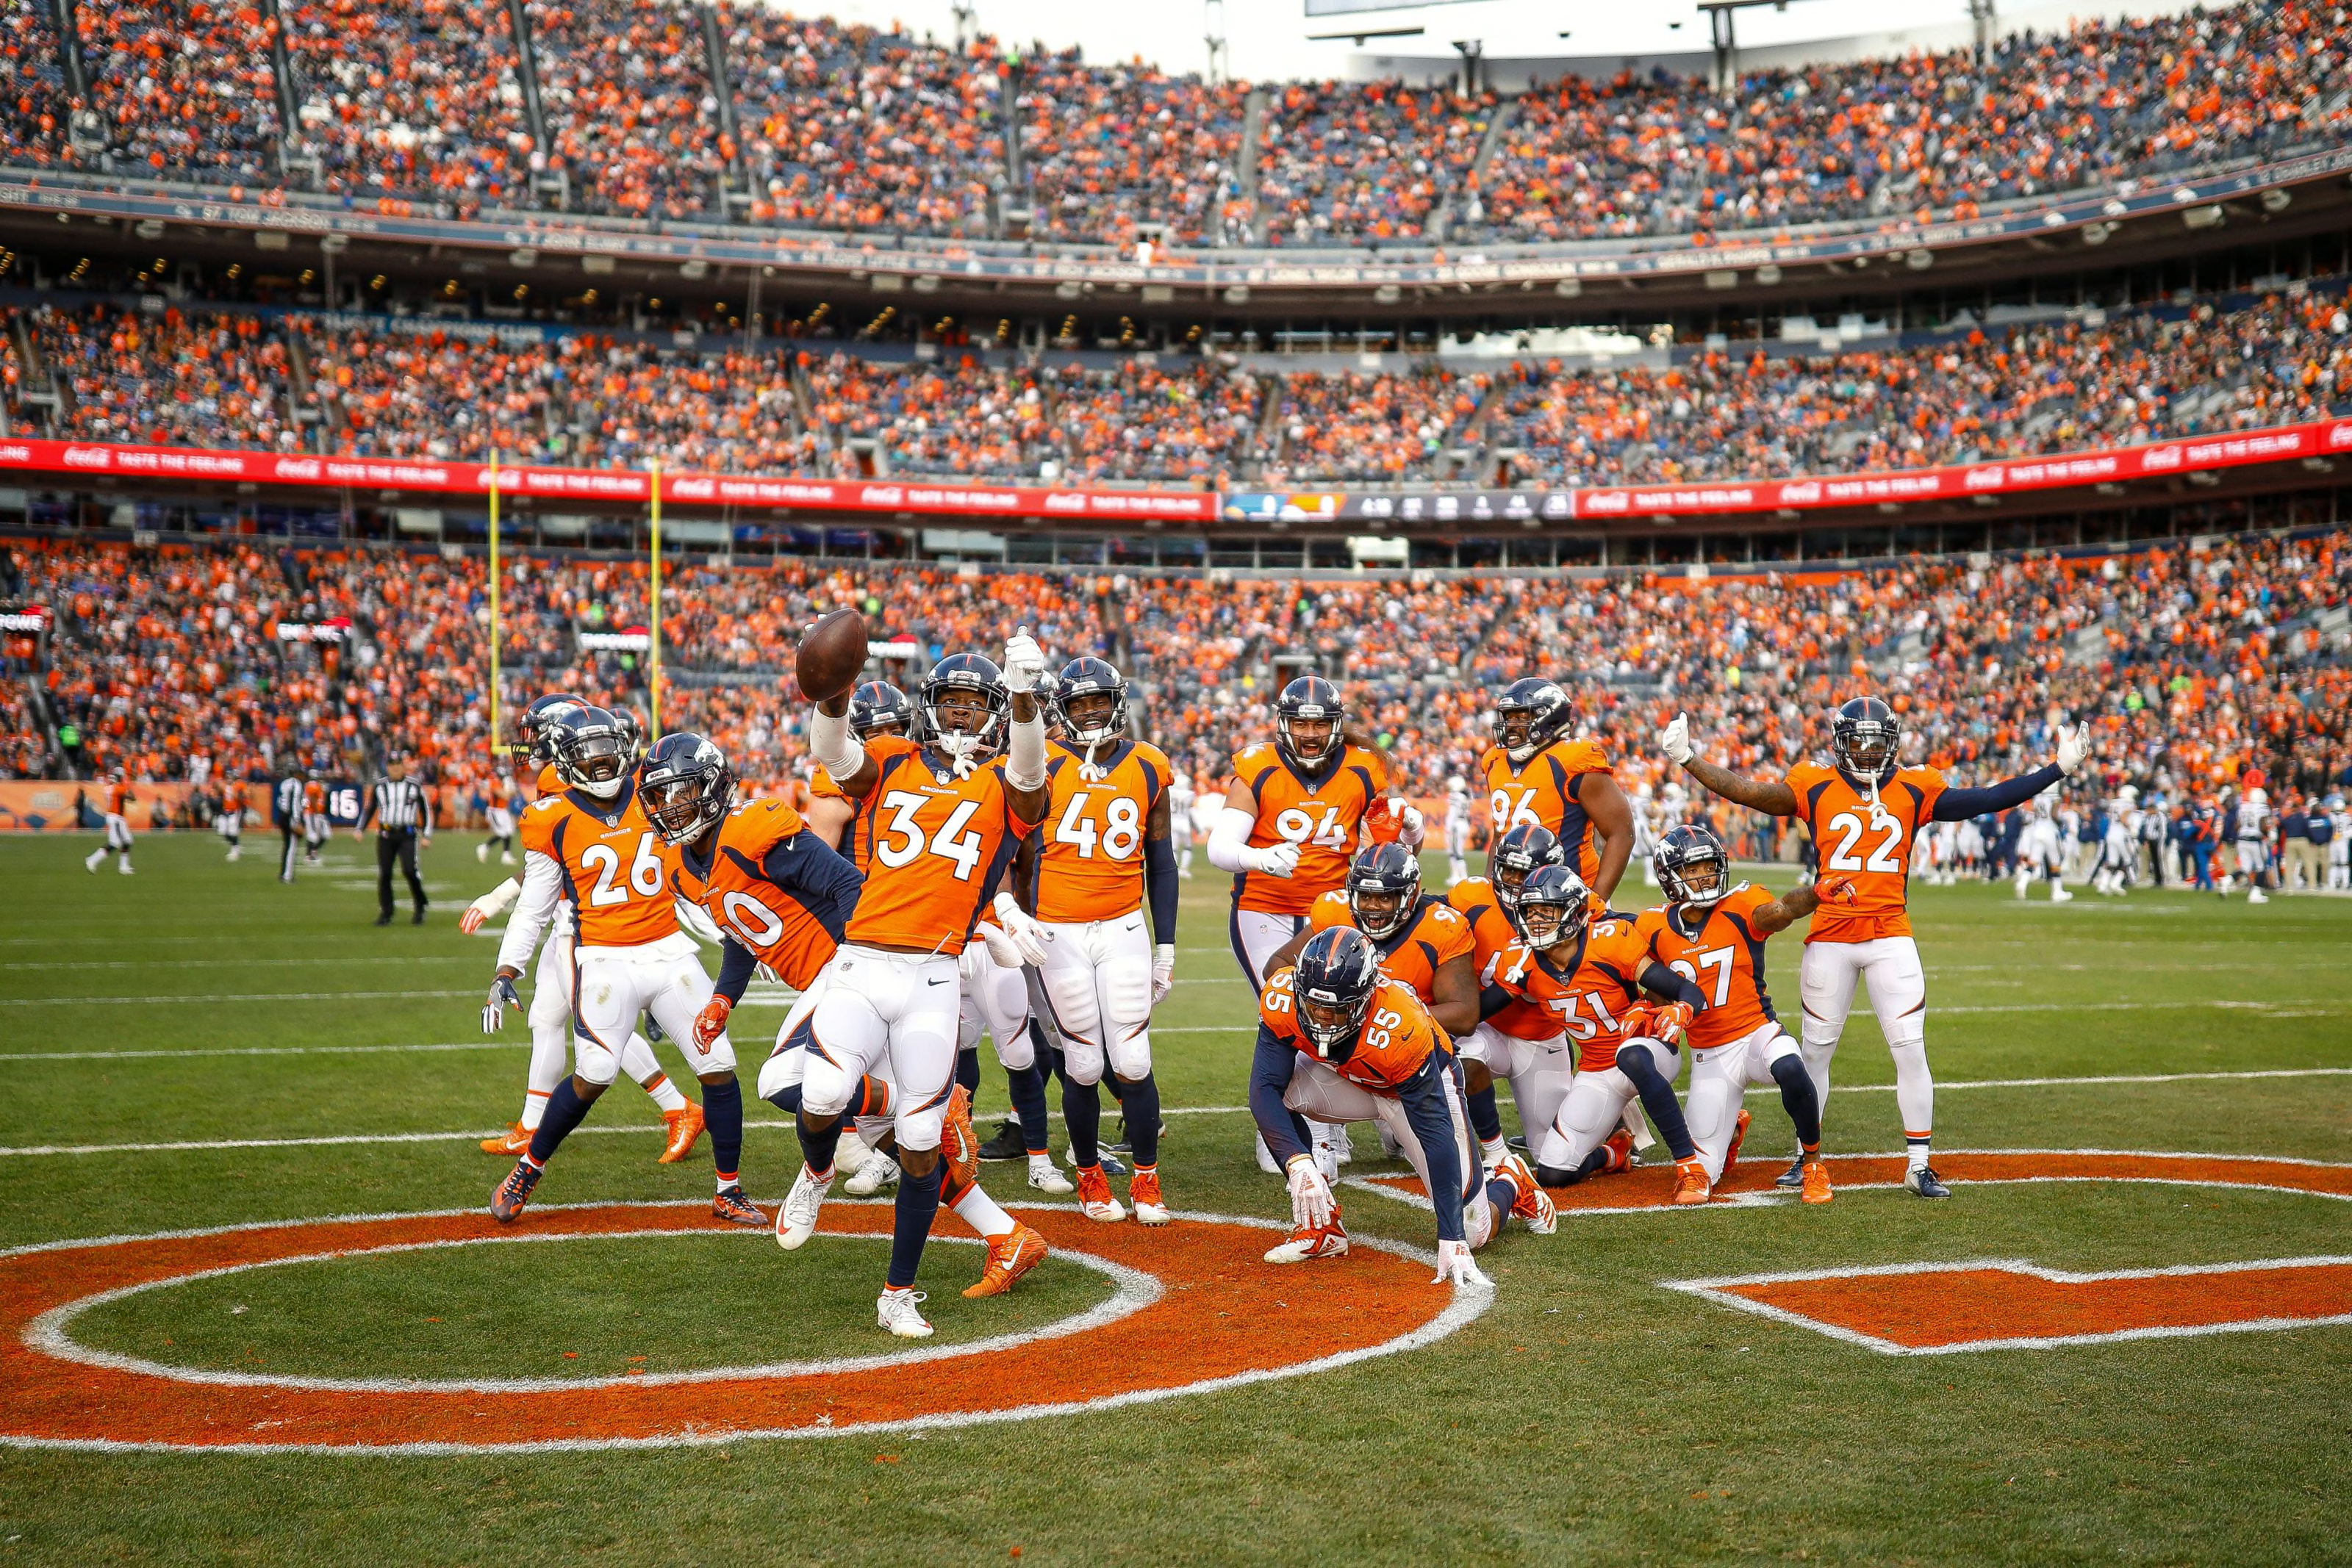 Ranking the Denver Broncos position groups from best to worst